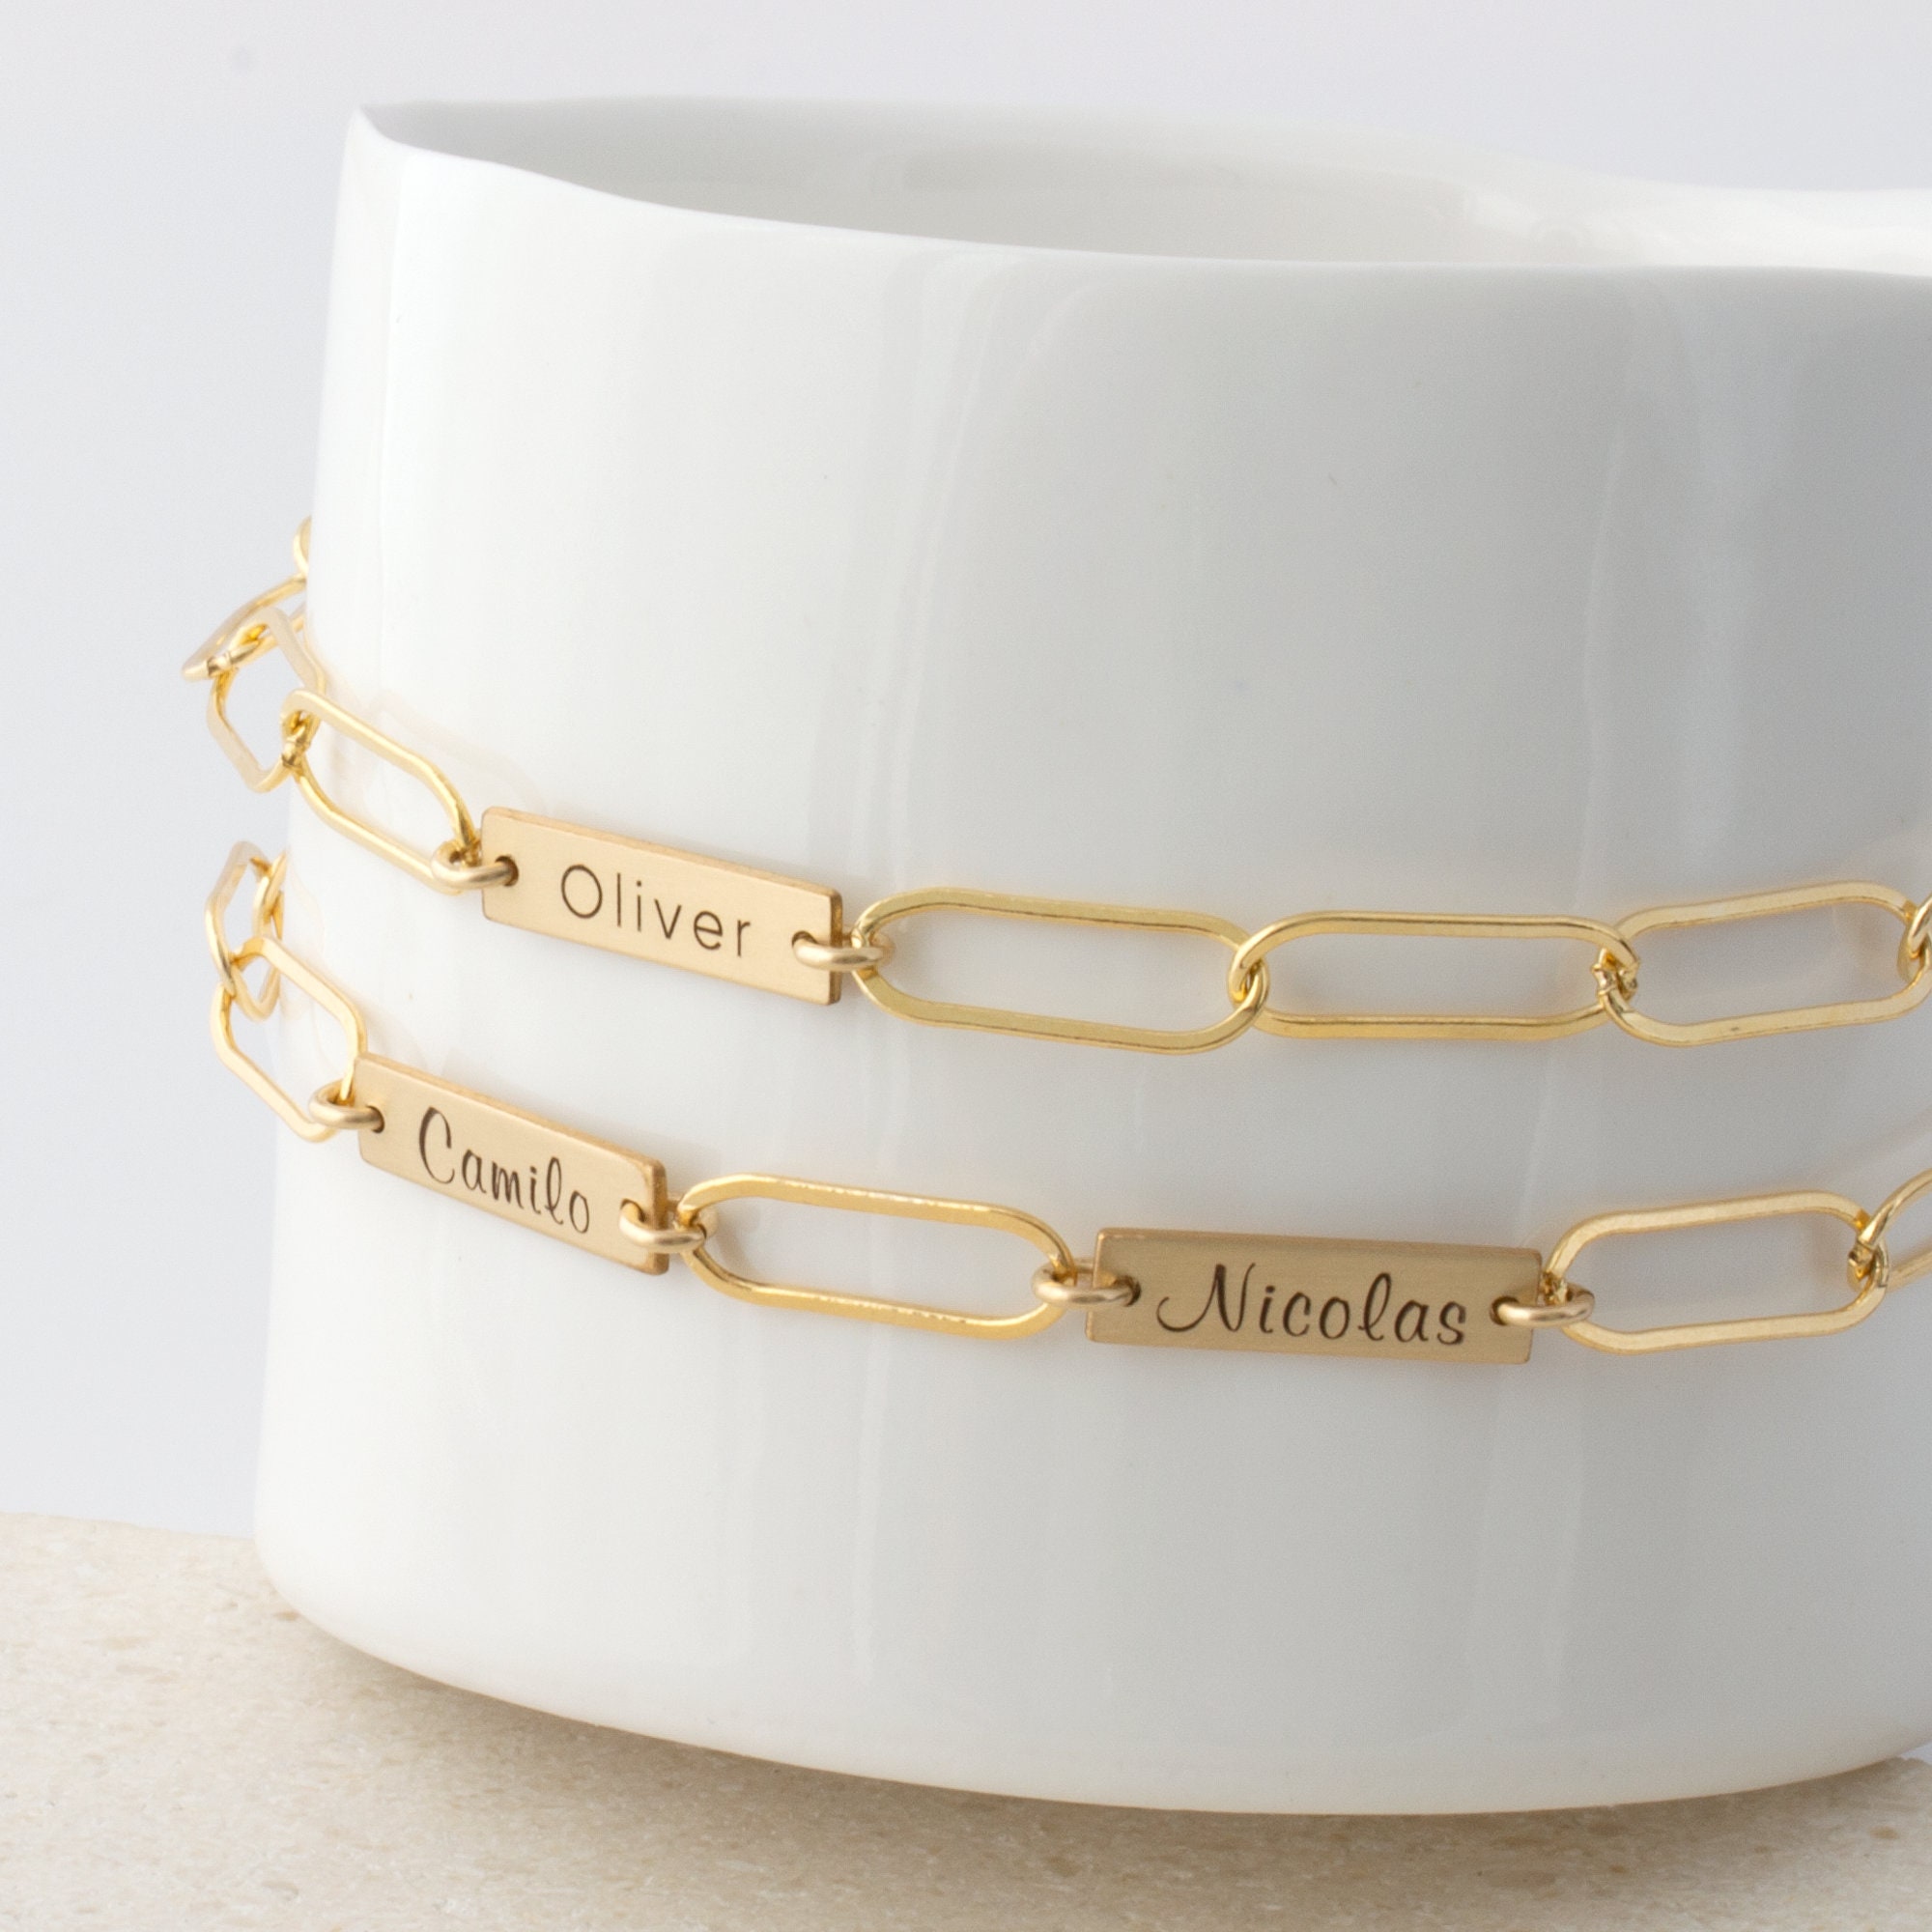 Paperclip Charm Bracelet with Kids Names in 24K Gold Plating by oNecklace